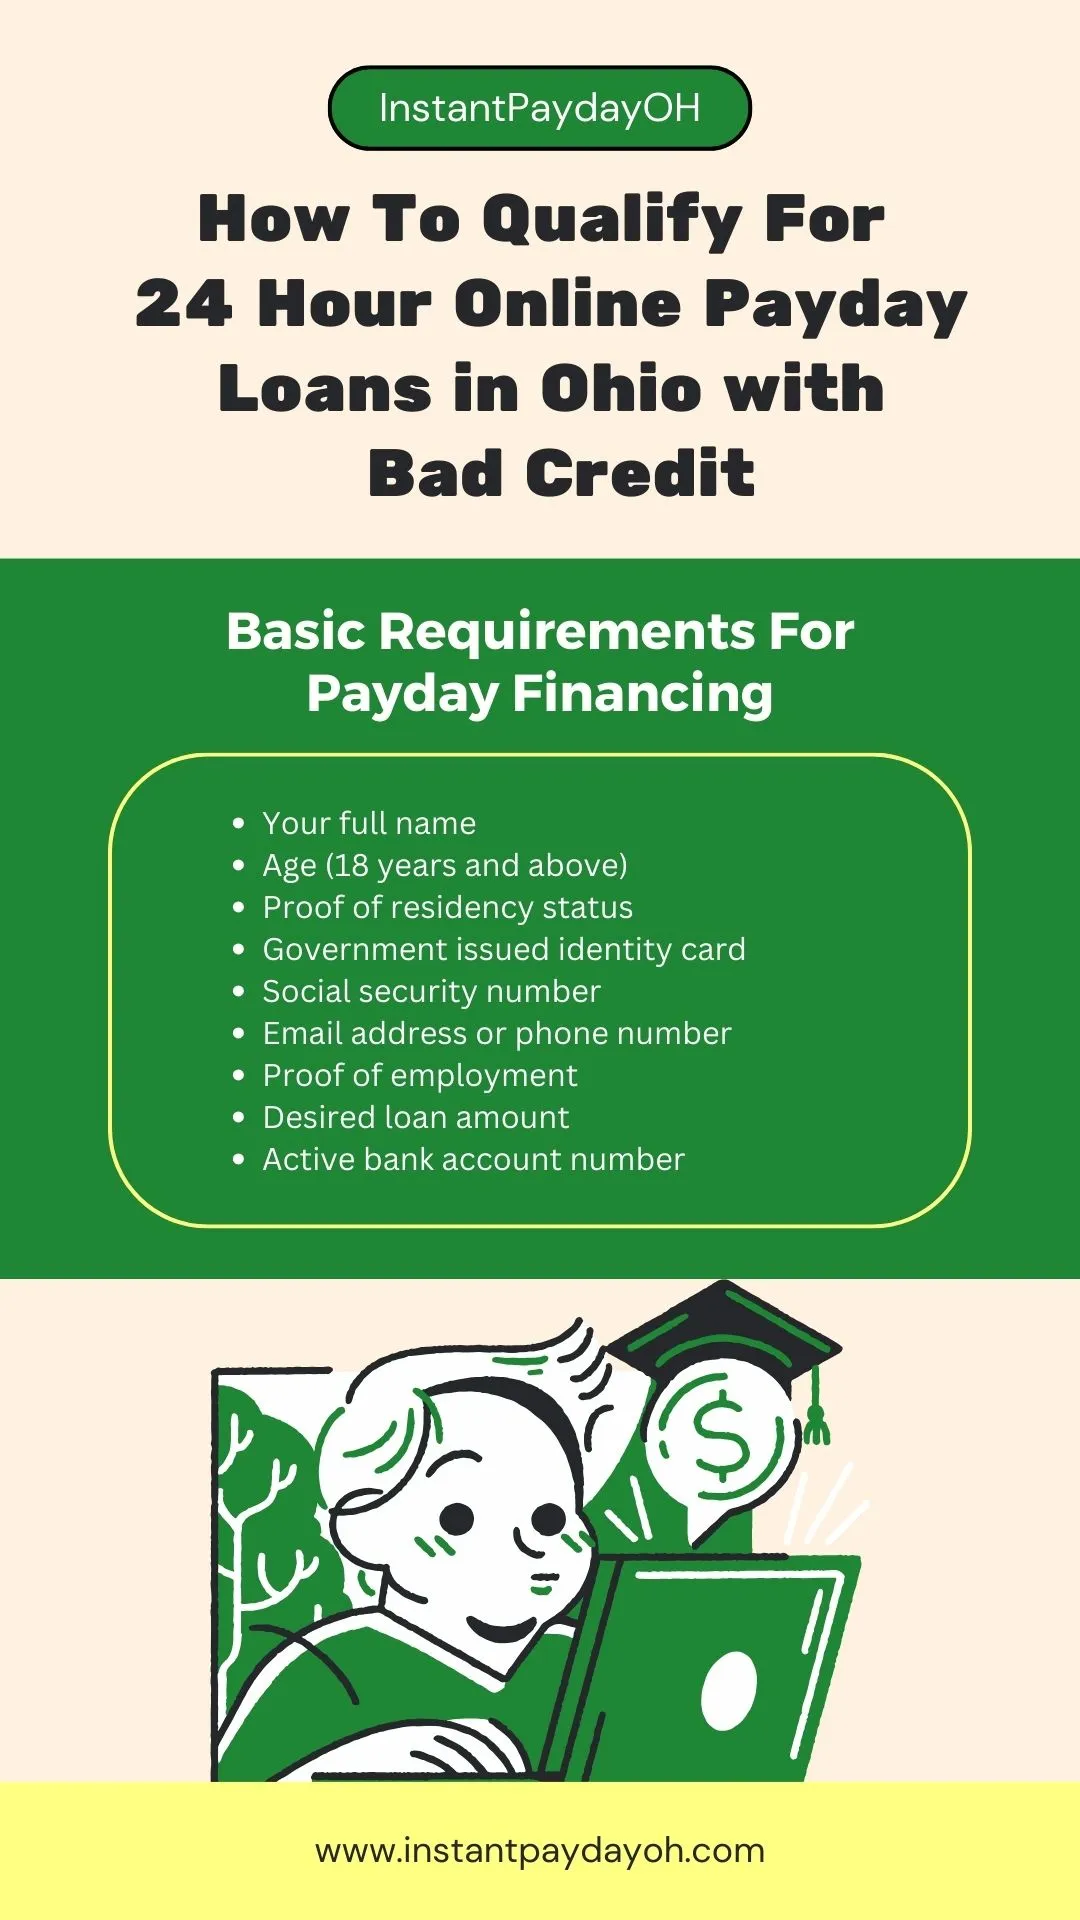 How To Qualify For 24 Hour Online Payday Loans in Ohio with Bad Credit